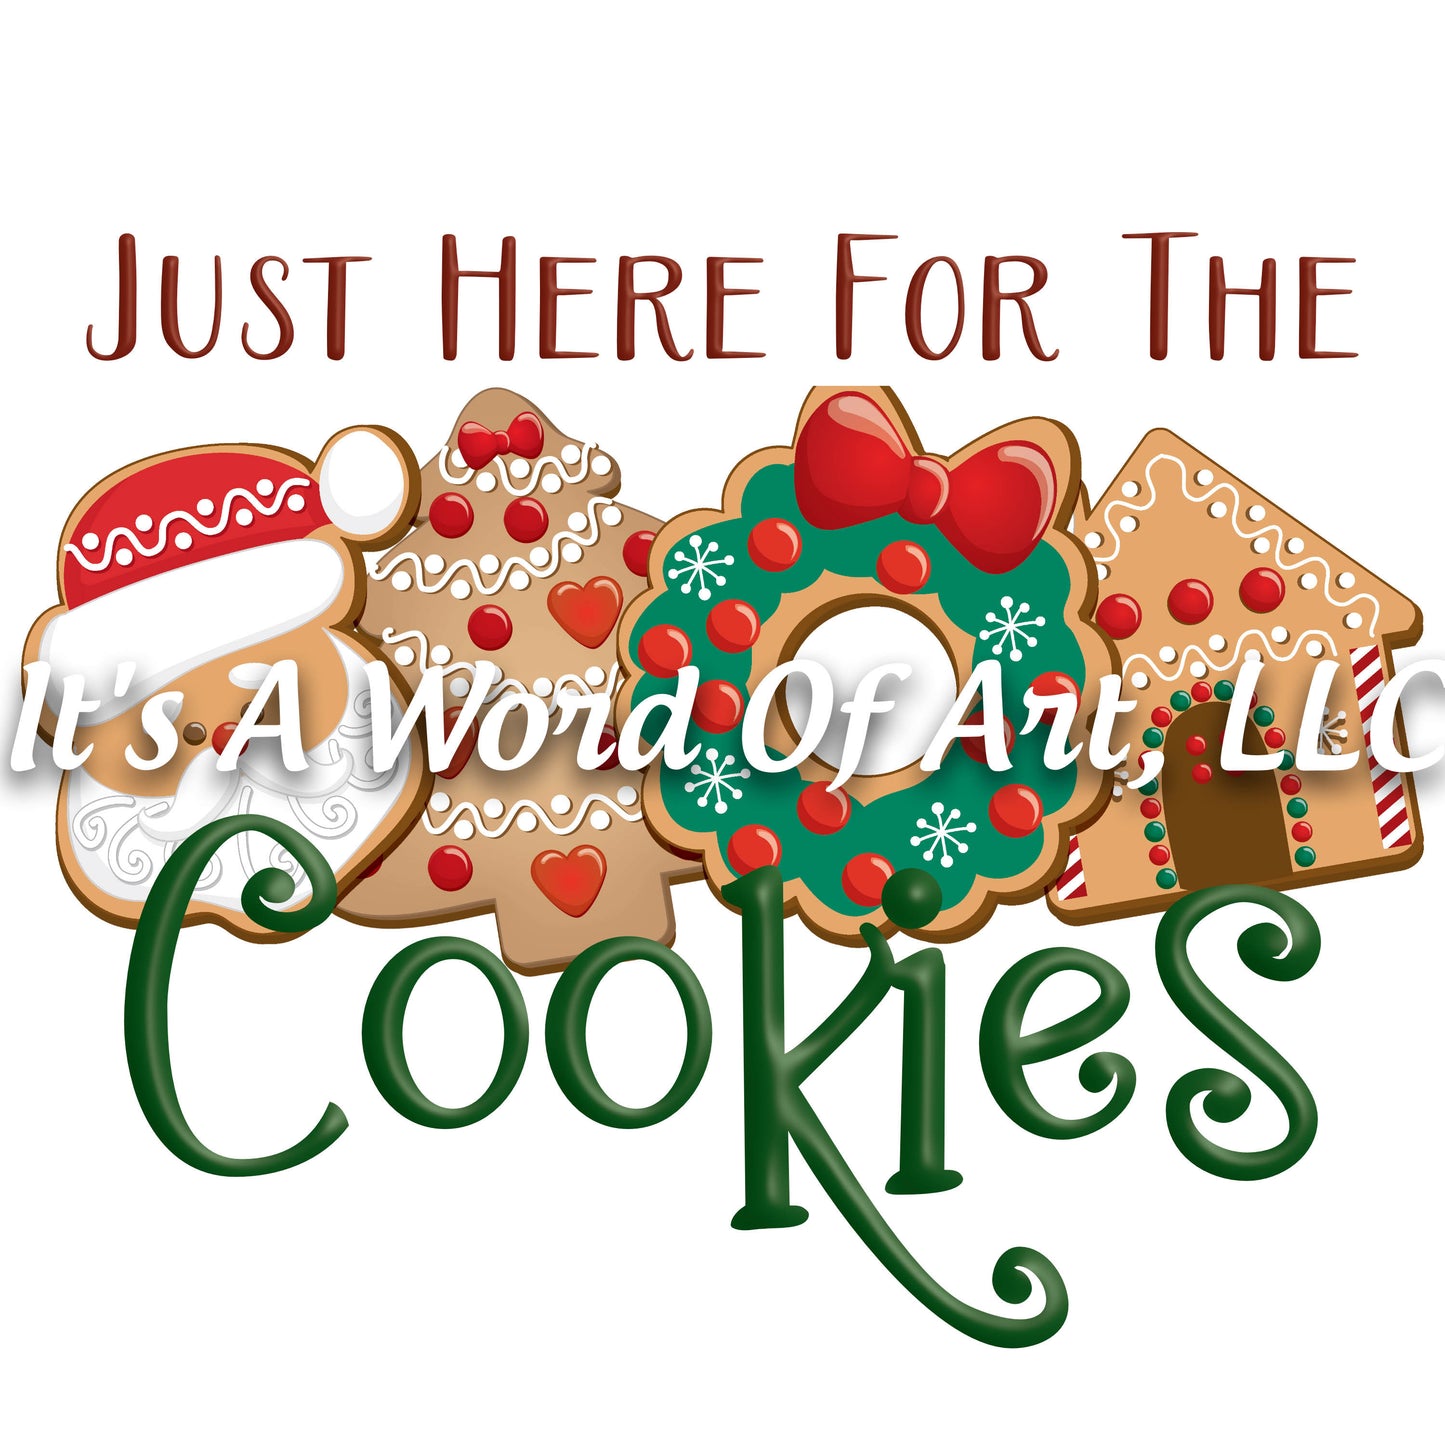 Christmas 178 - Just here for the Cookies Christmas - Sublimation Transfer Set/Ready To Press Sublimation Transfer/Sublimation Transfer